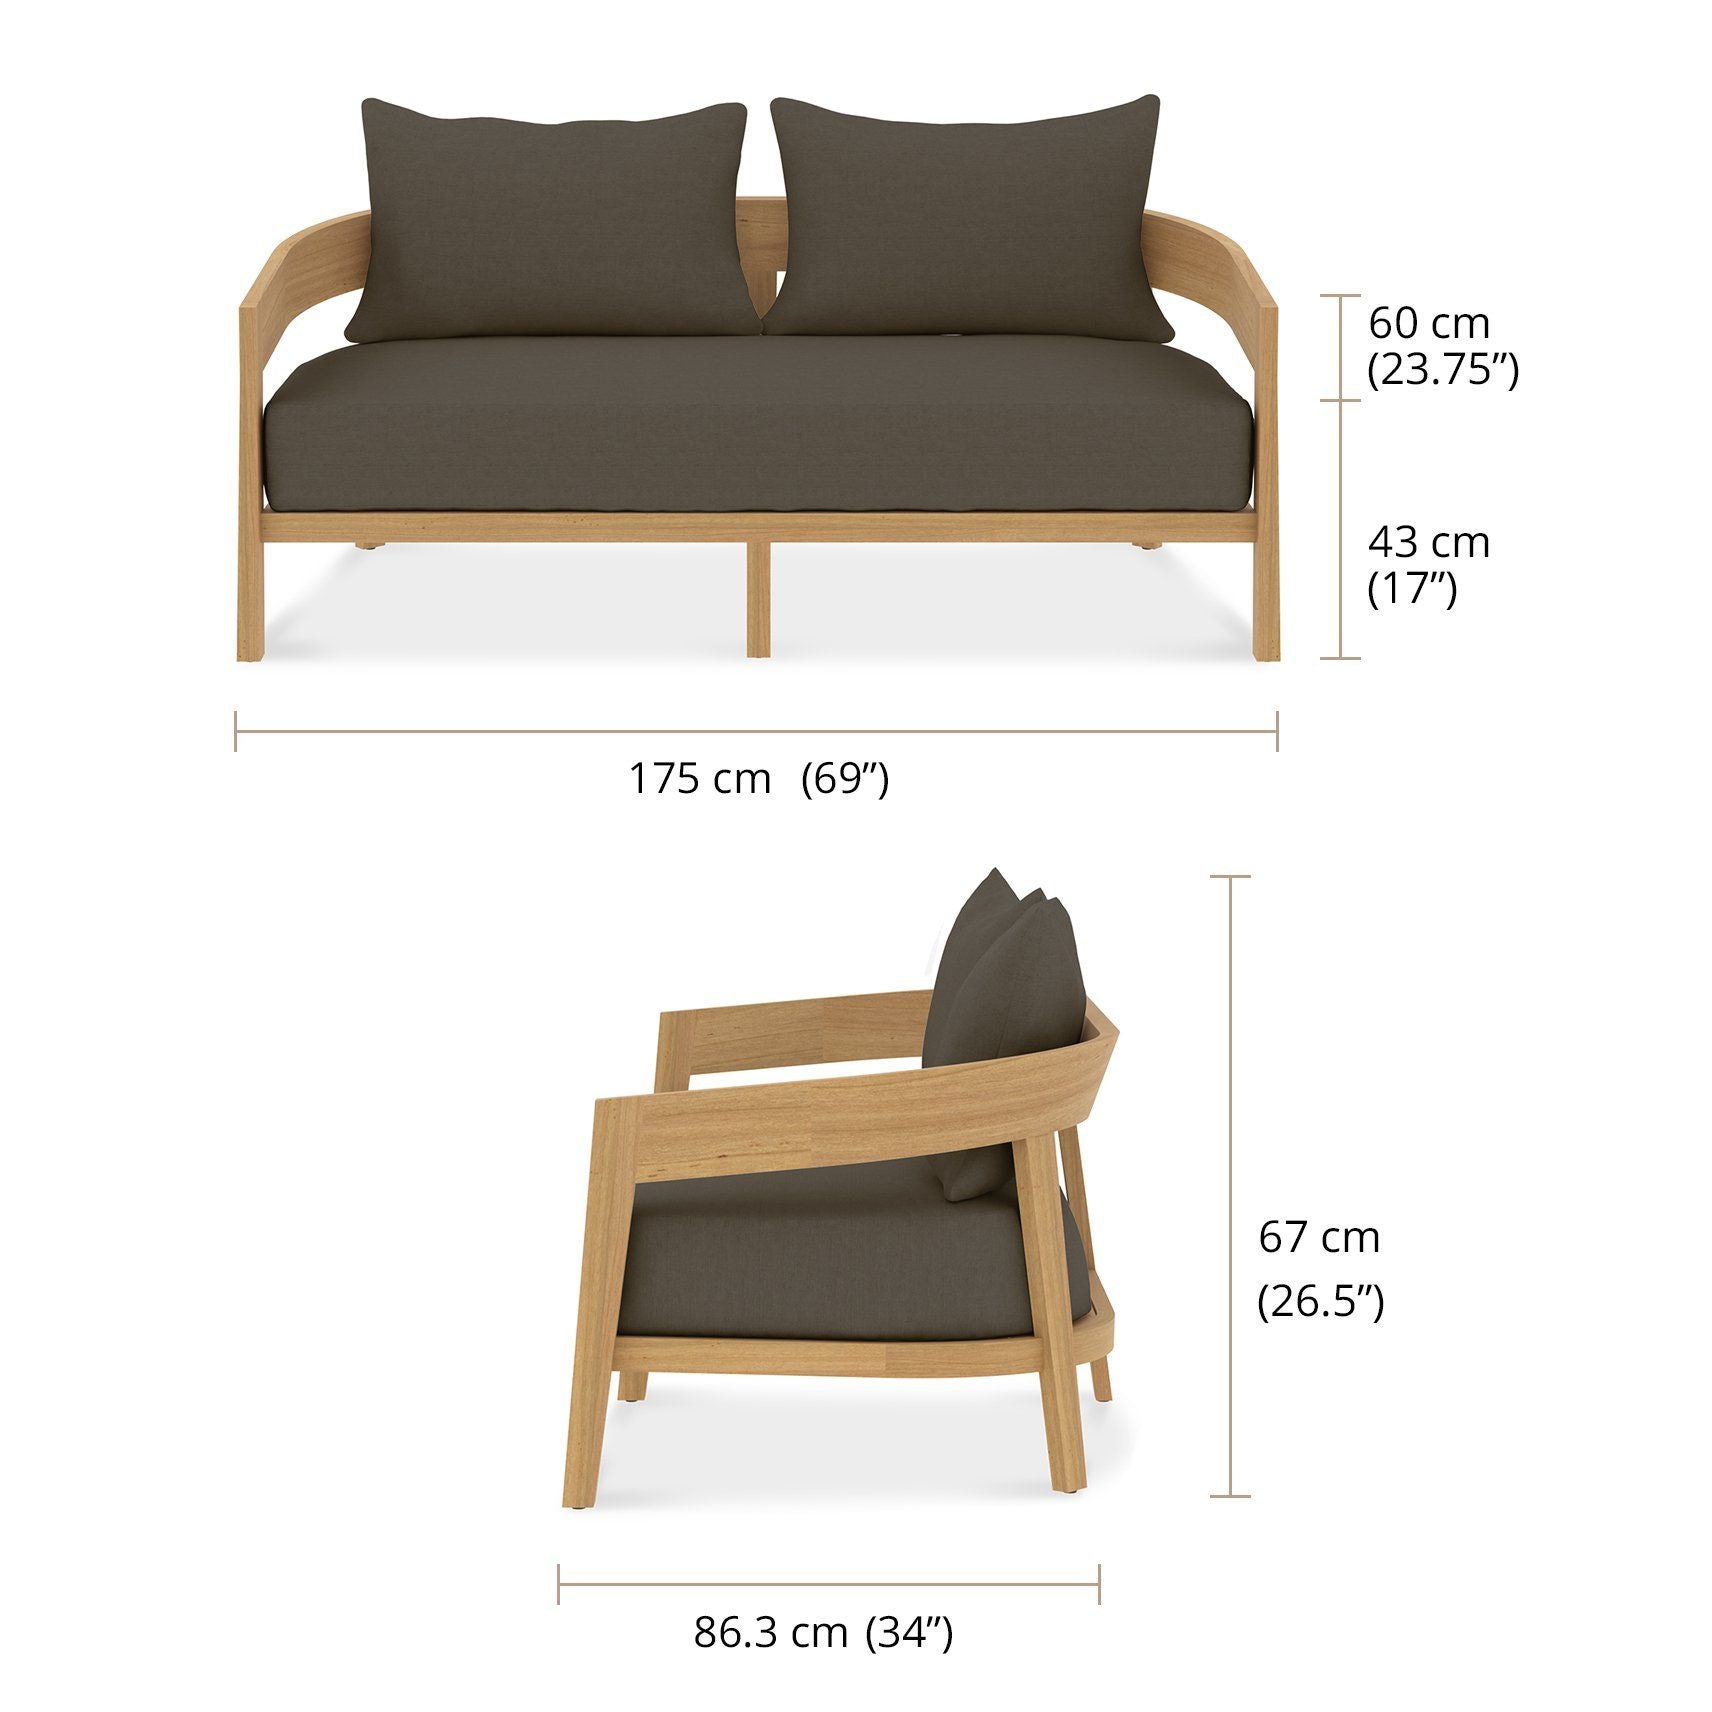 The Windsor Outdoor Teak Lounge 2 Seater Sofa Dimensions